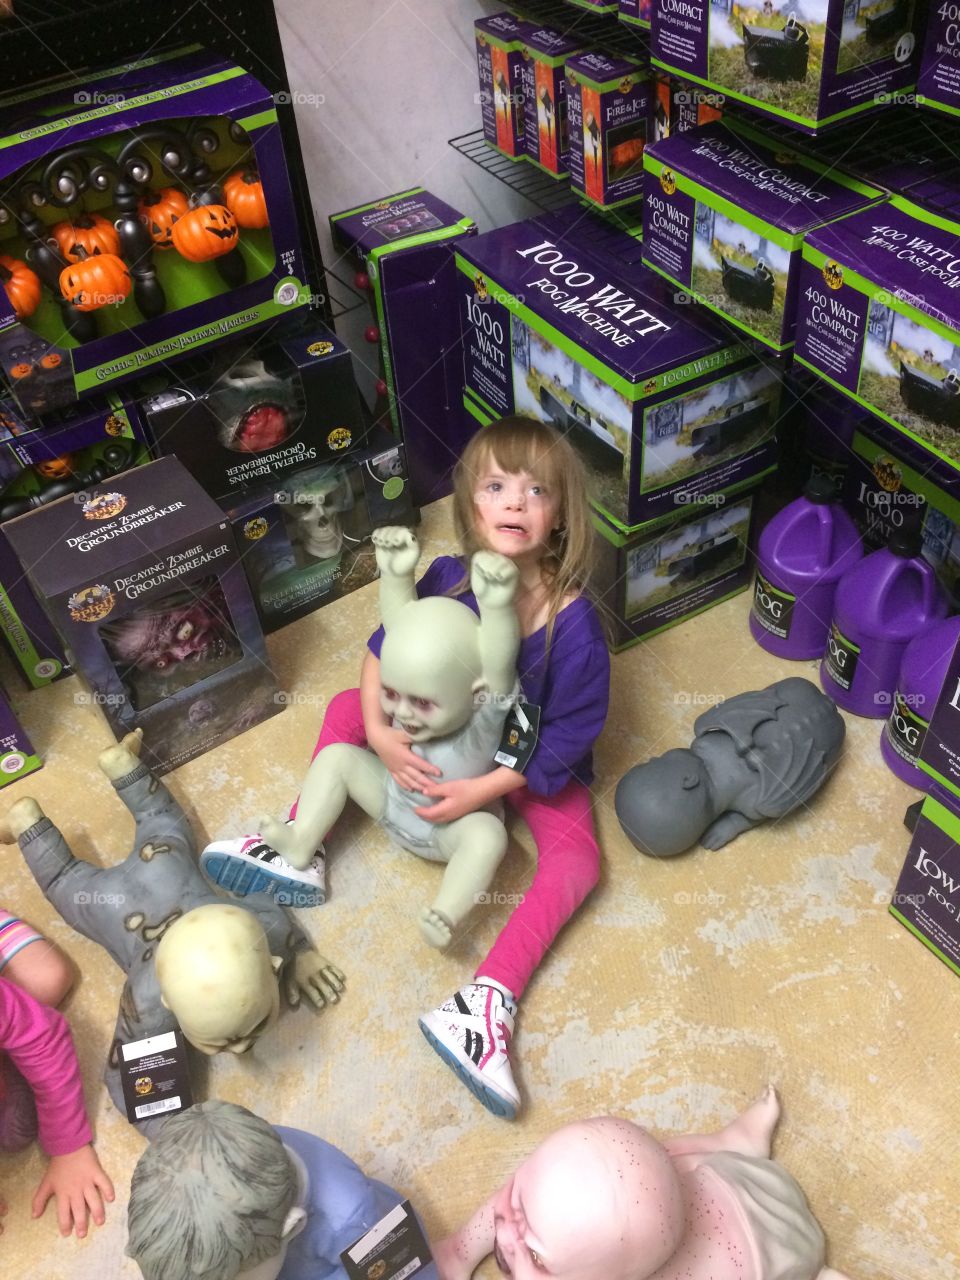 Little girl with Down syndrome at the Halloween store